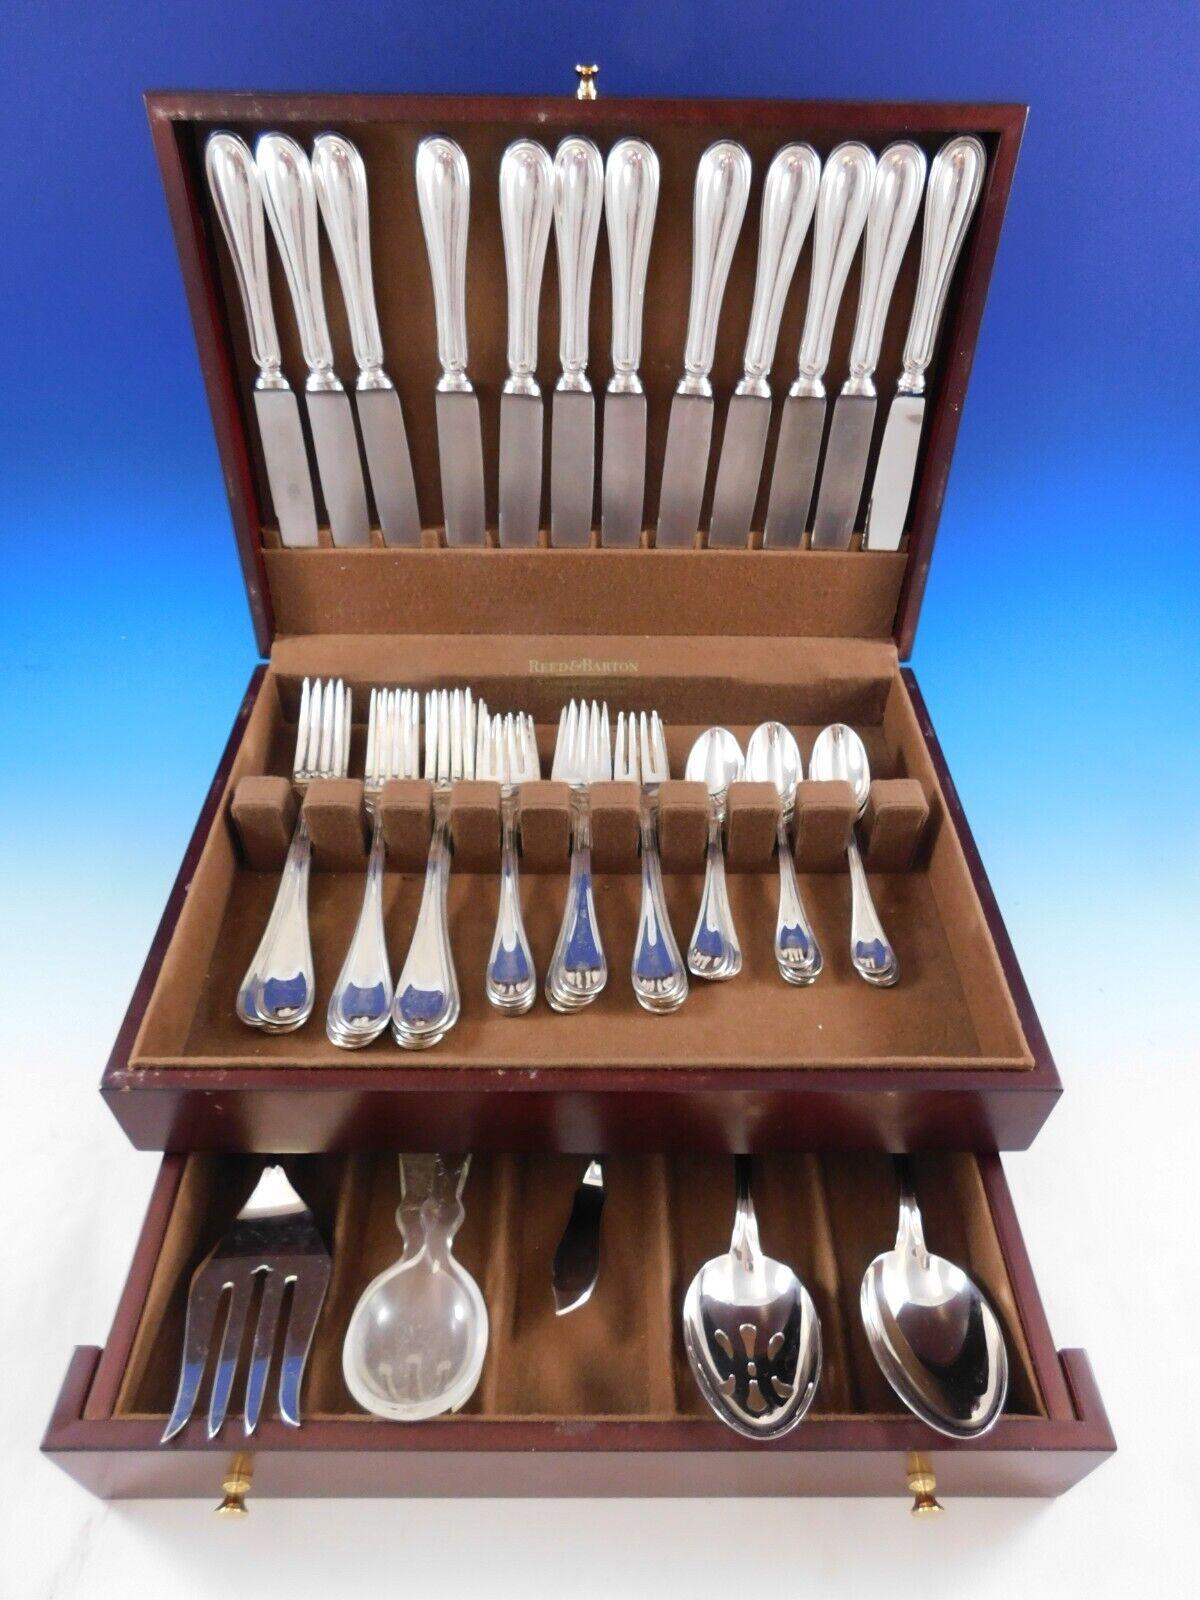 The Giorgio pattern is part of the Italian Collection by Wallace Silversmiths, inspired by traditional European continental size sterling silver flatware. Each place setting is made in a true Continental Size, and in a heavier-than-standard weight.